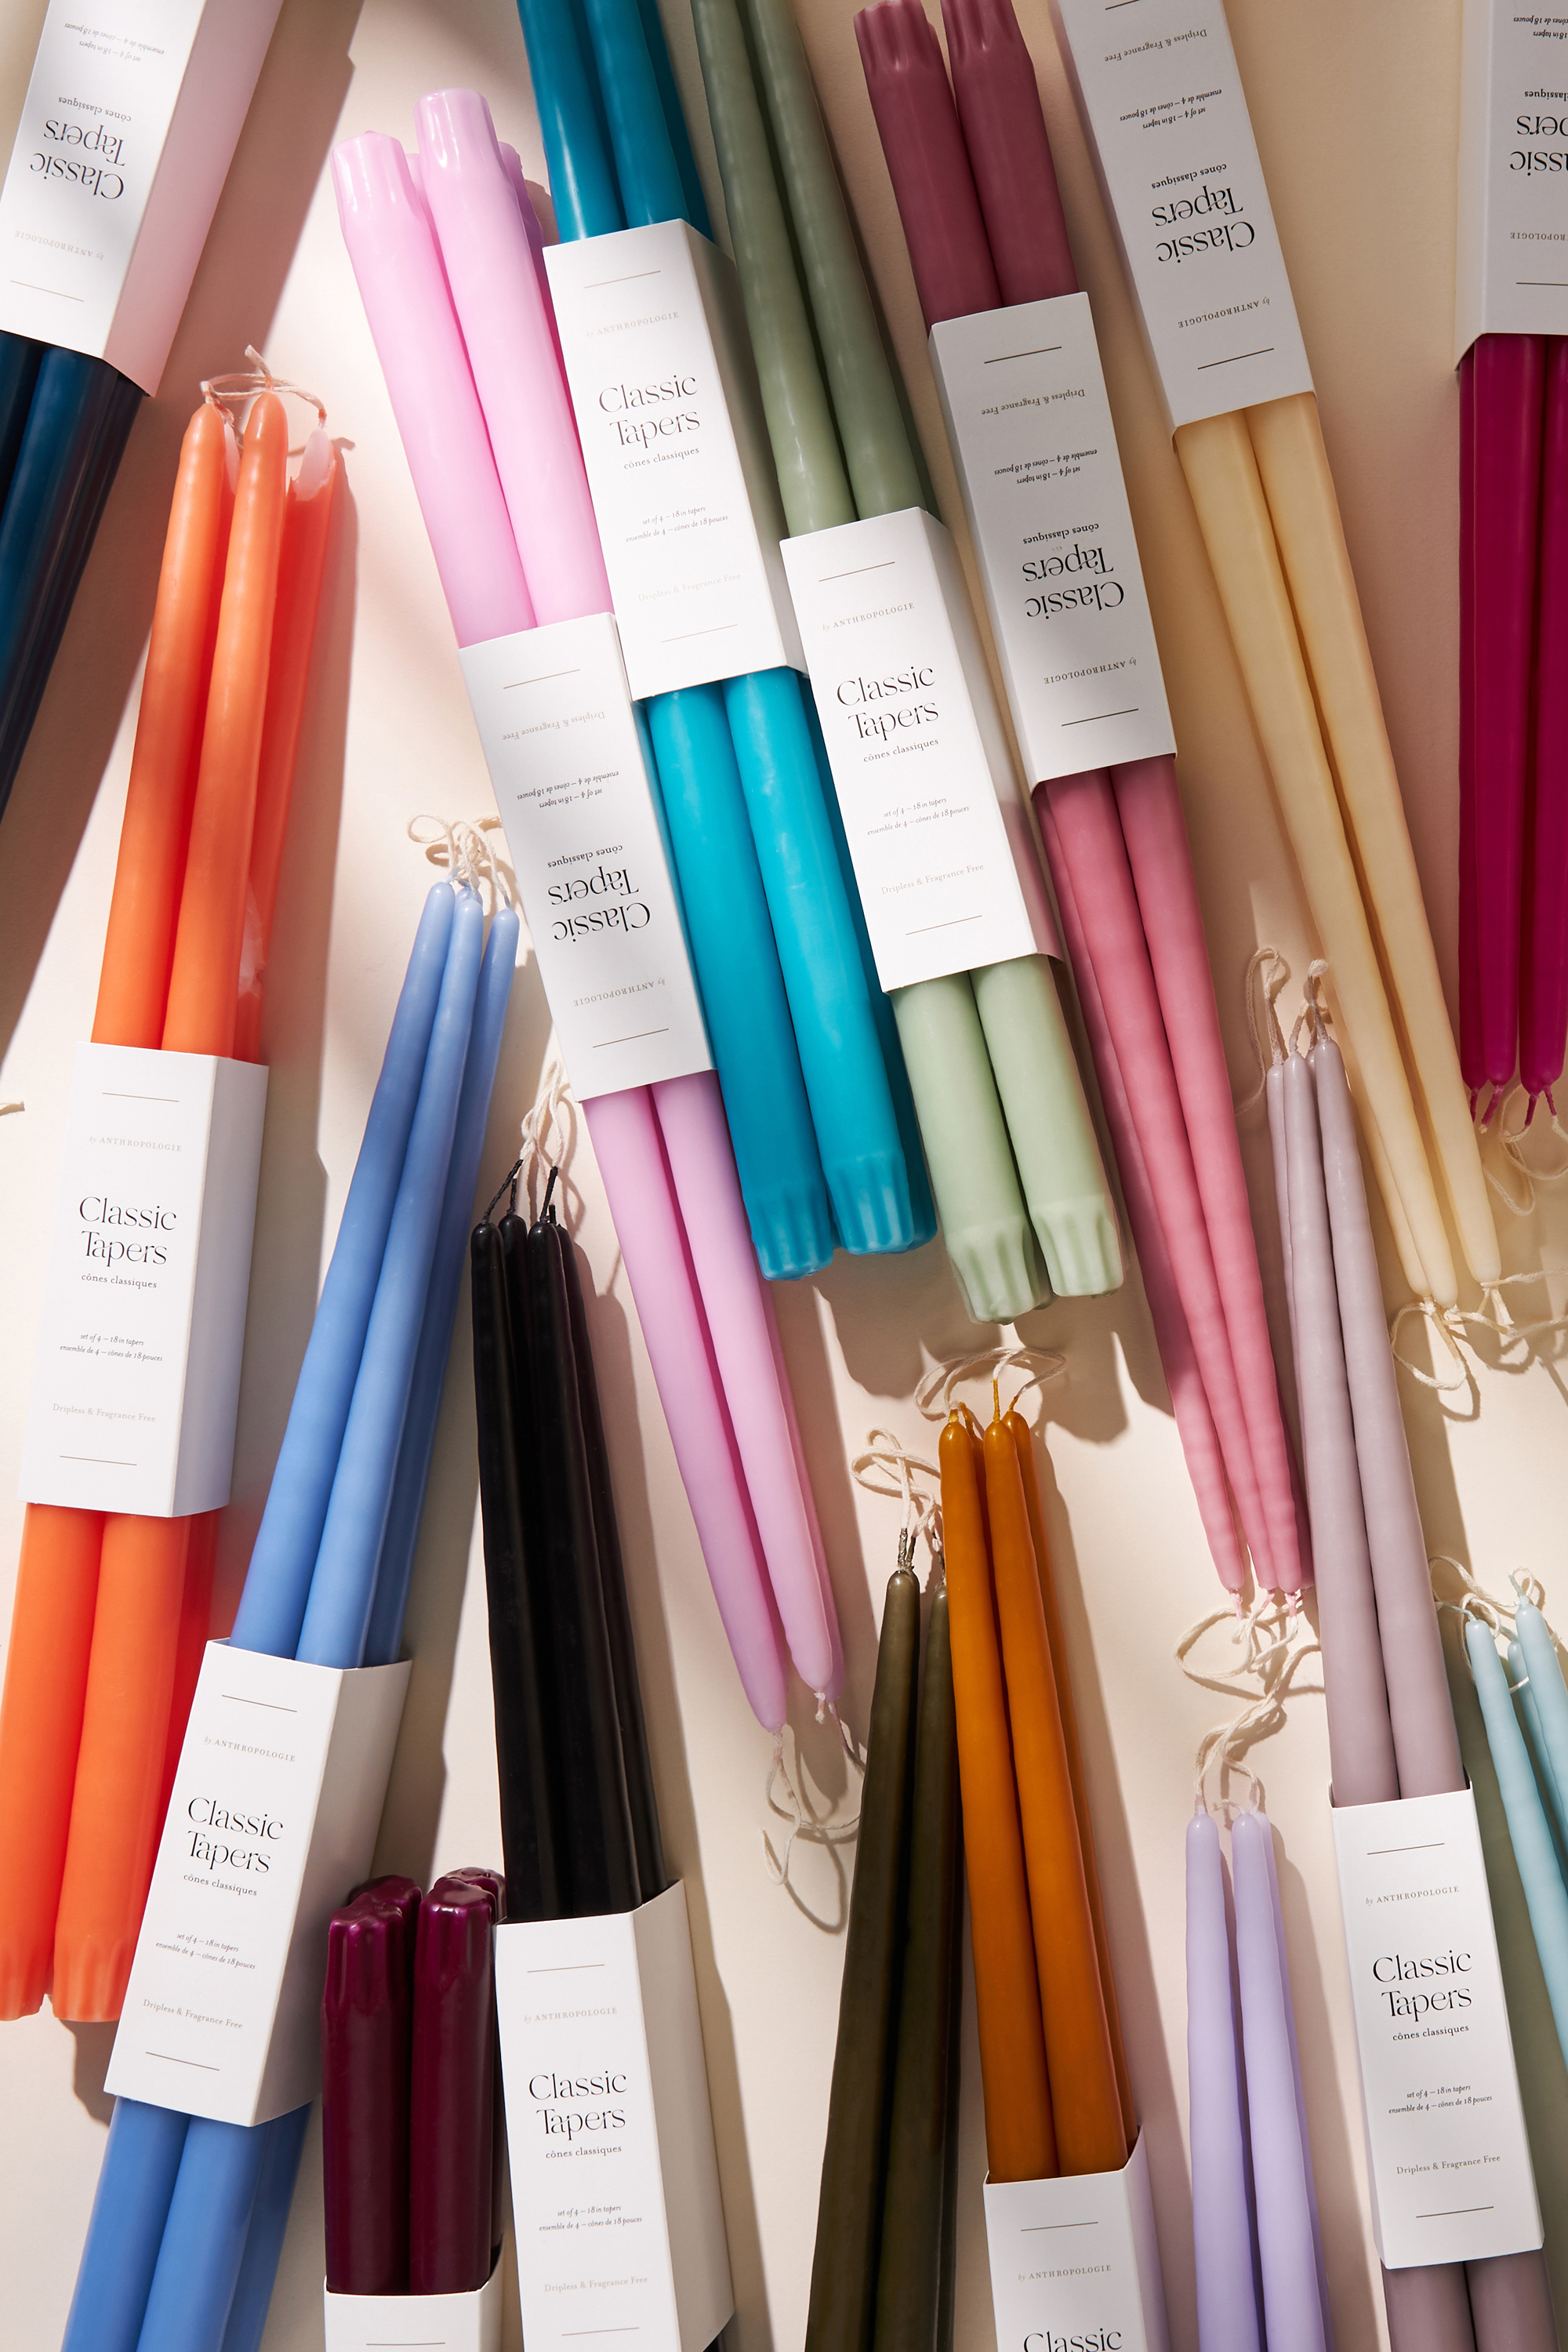 classic taper candles from anthropologie 6